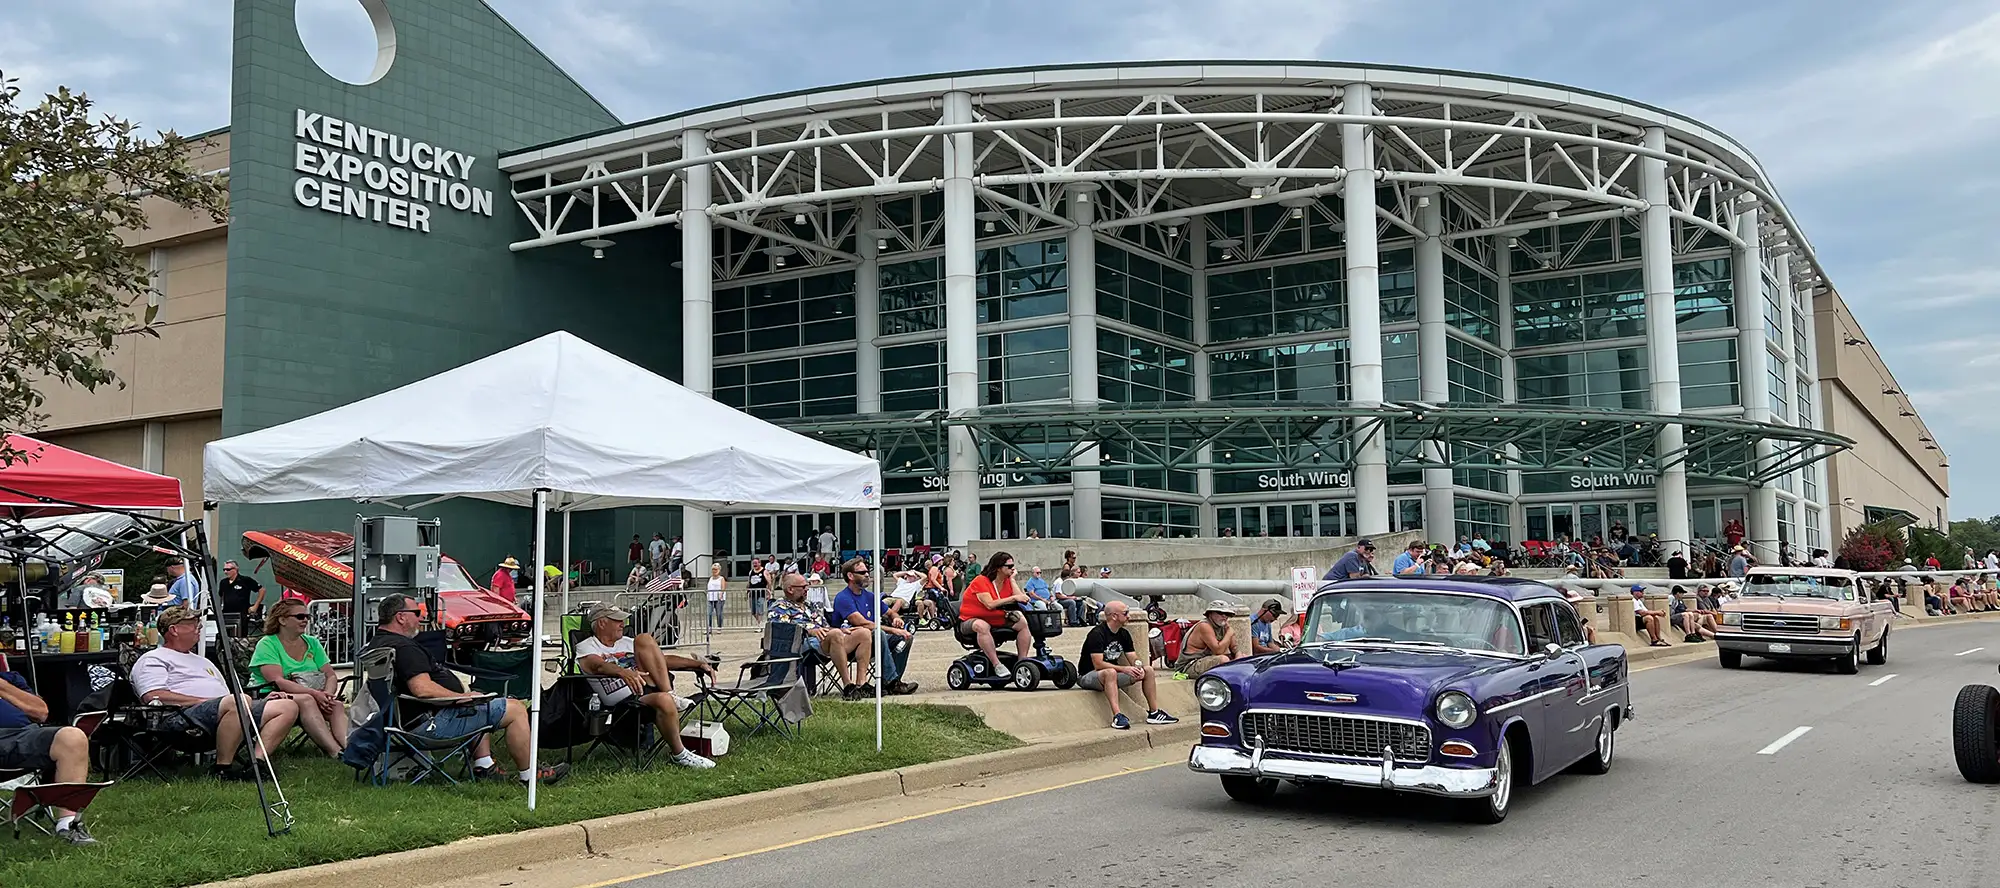 Cars and crowds in front of Kentucky Expo Center